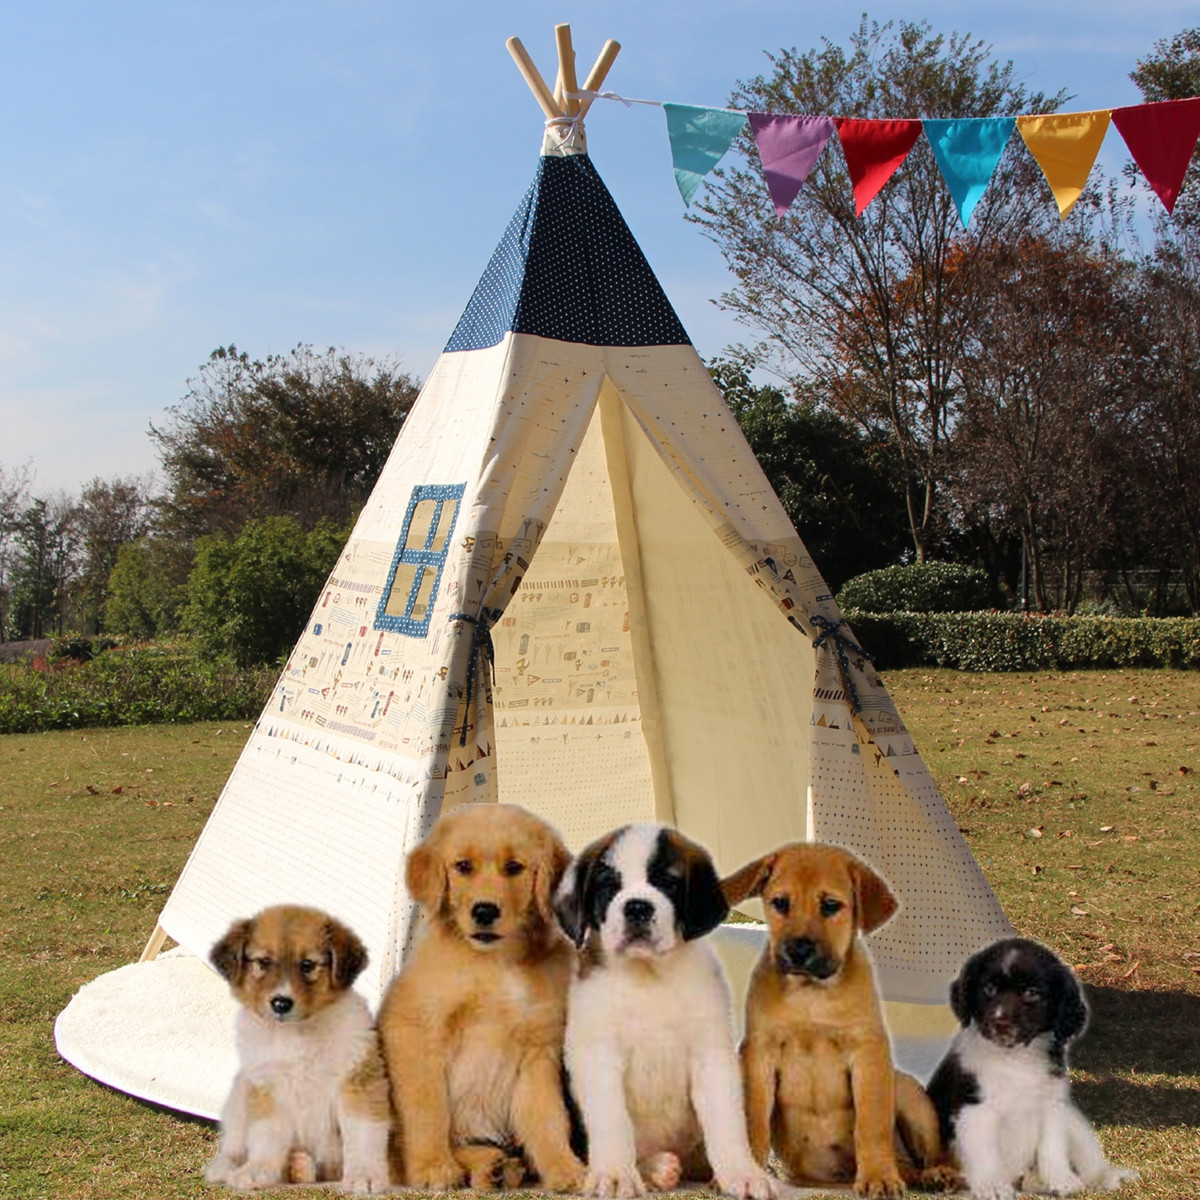 Large Kids Pet Teepee Canvas Play Tent Tipi Outdoor Beige with Cushioned Floor Mat